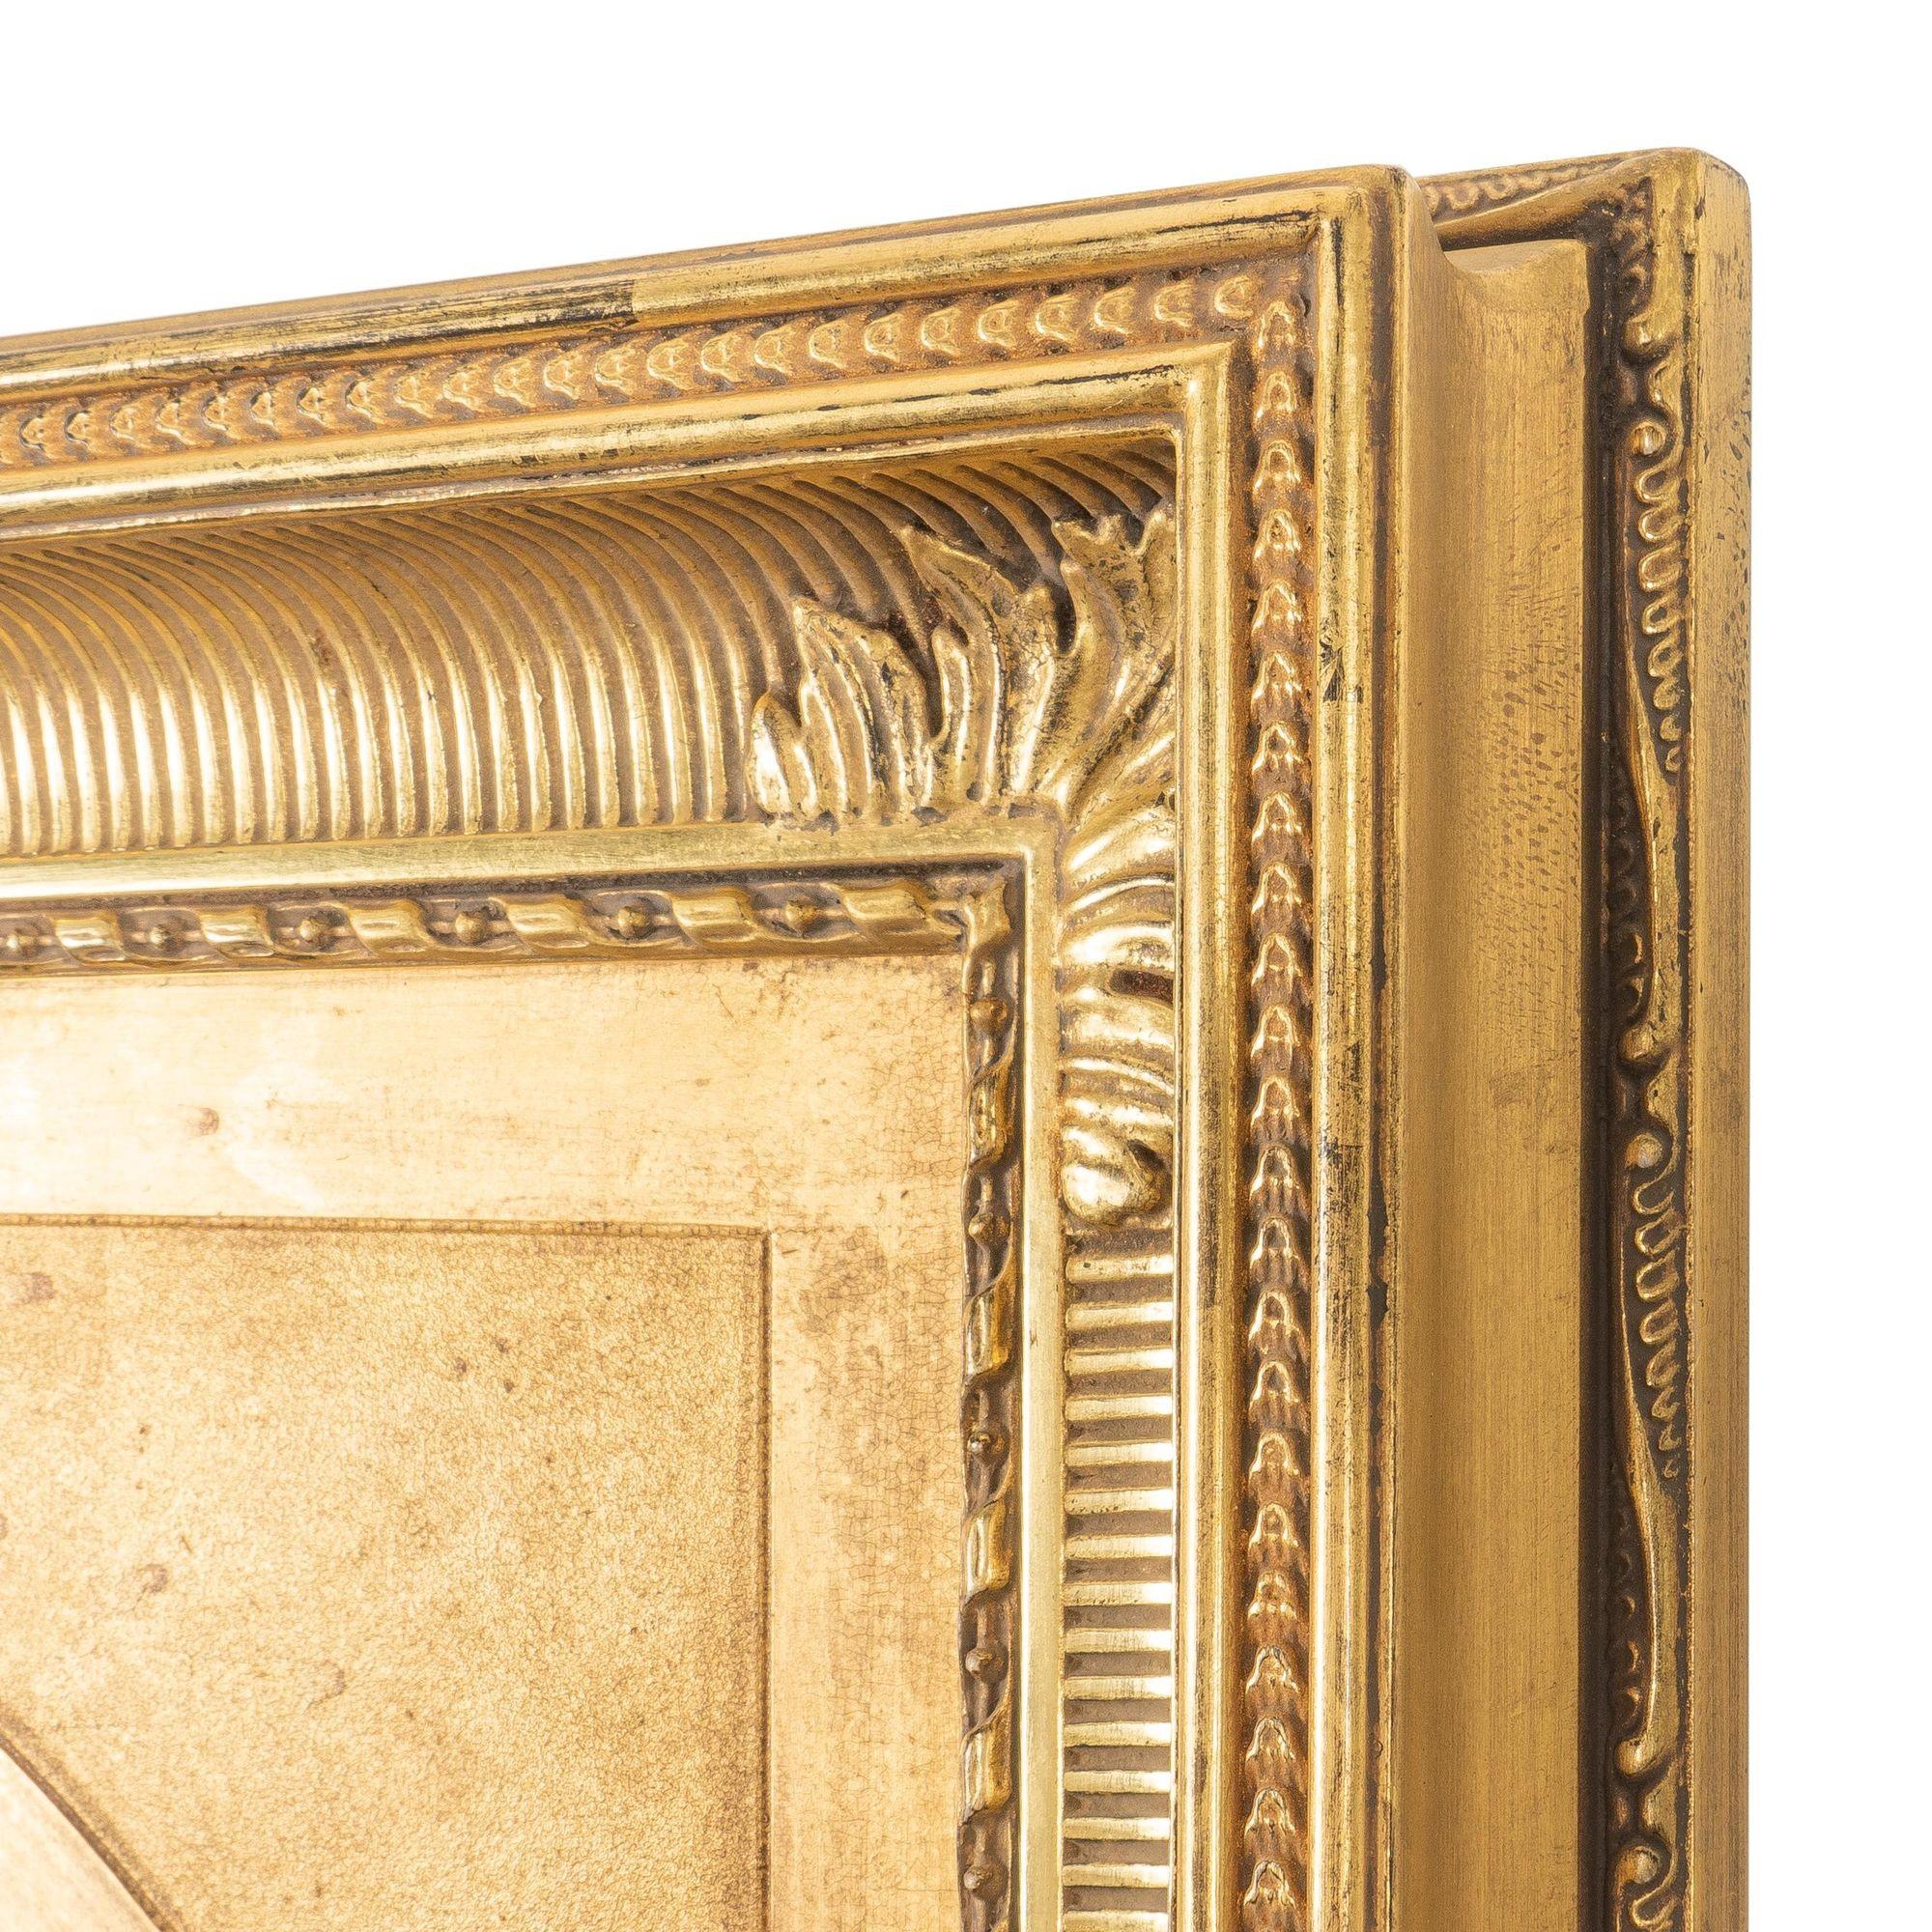 American rectangular Hudson River School style fluted cove molded picture frame has been assembled with a period gilt oval spandrel and fitted with mirrored glass. The surfaces are gilt gesso on Northern White Pine.